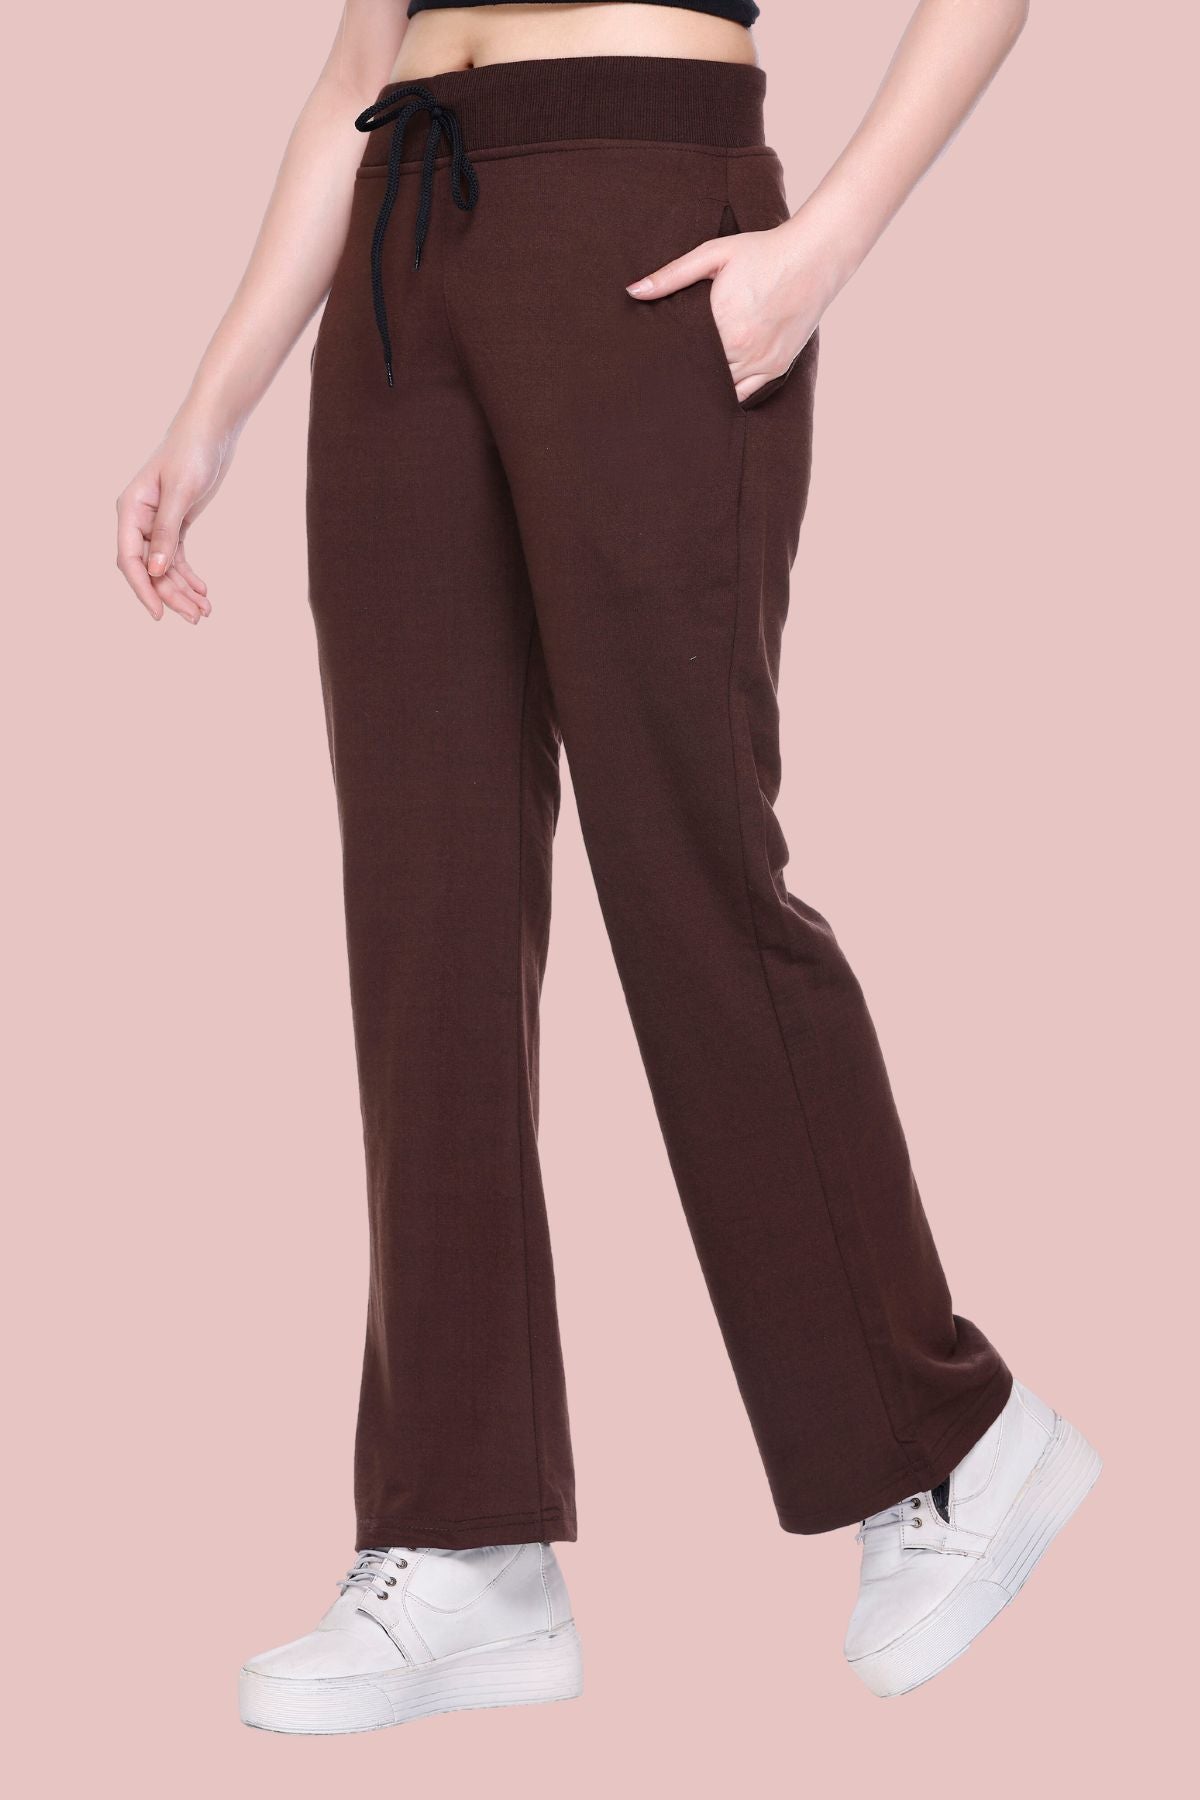 White Moon  Women Solid Coffee Bootcut Track Pants